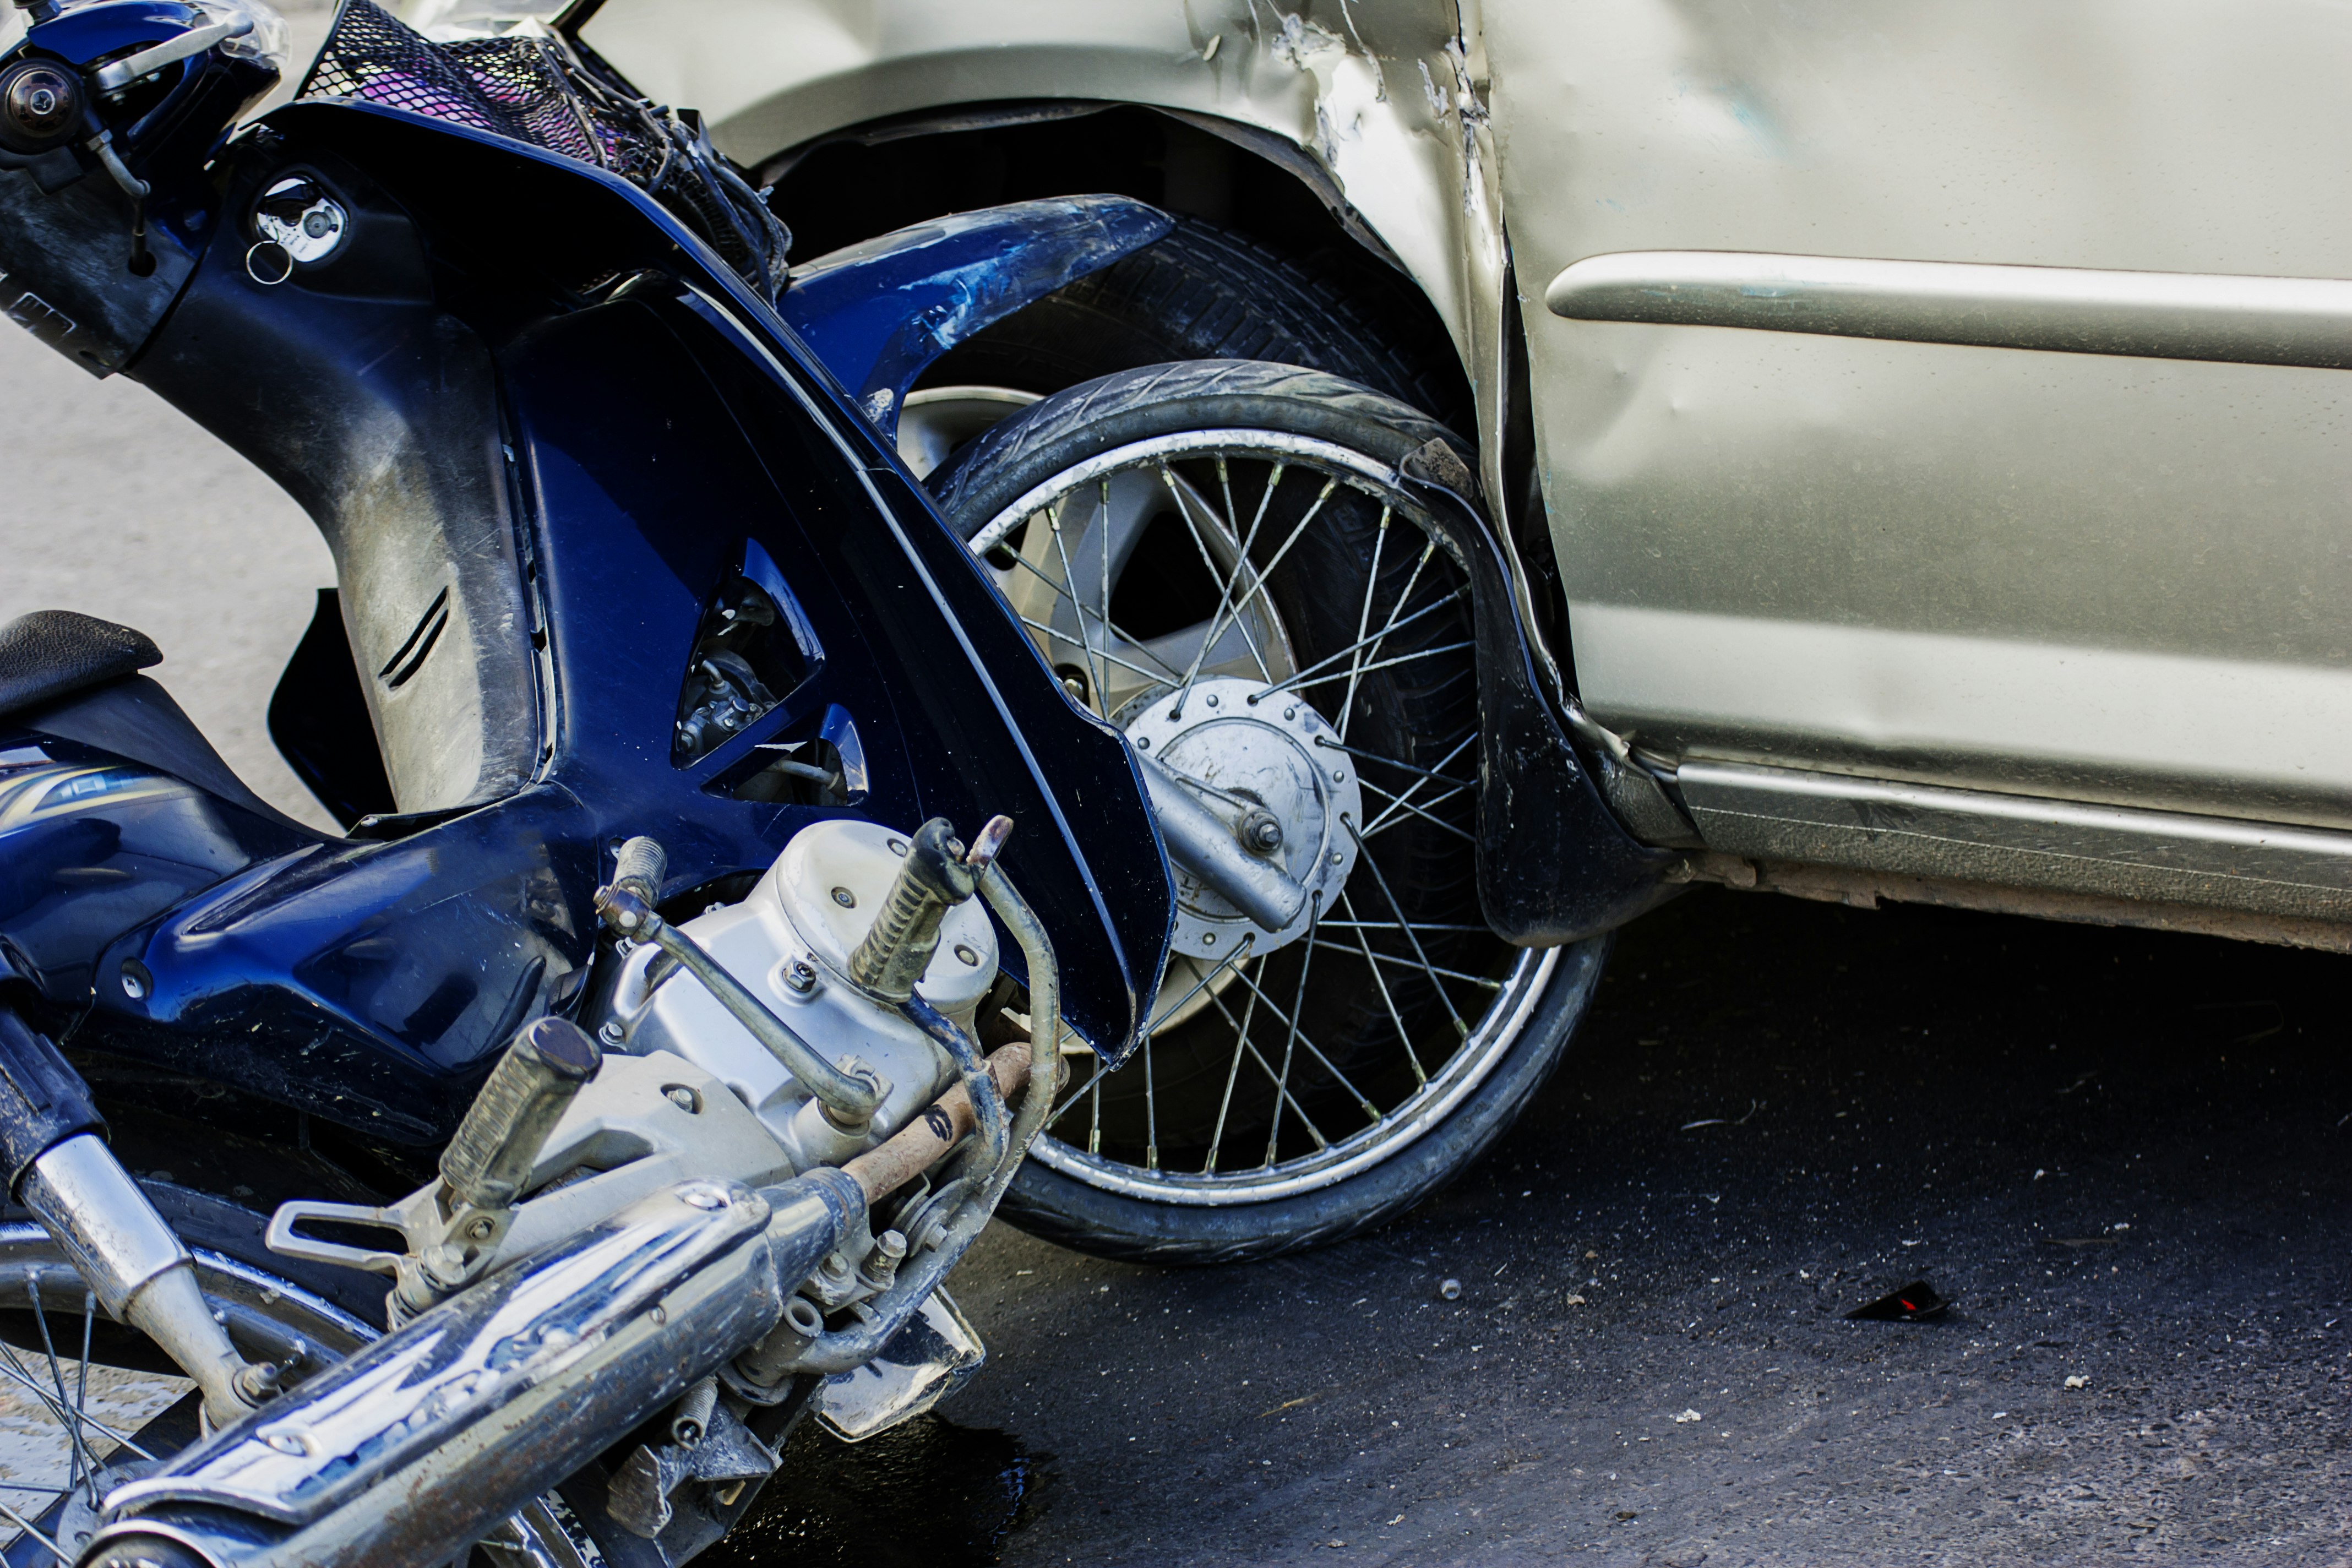 Best Gore Motorcycle Accidents